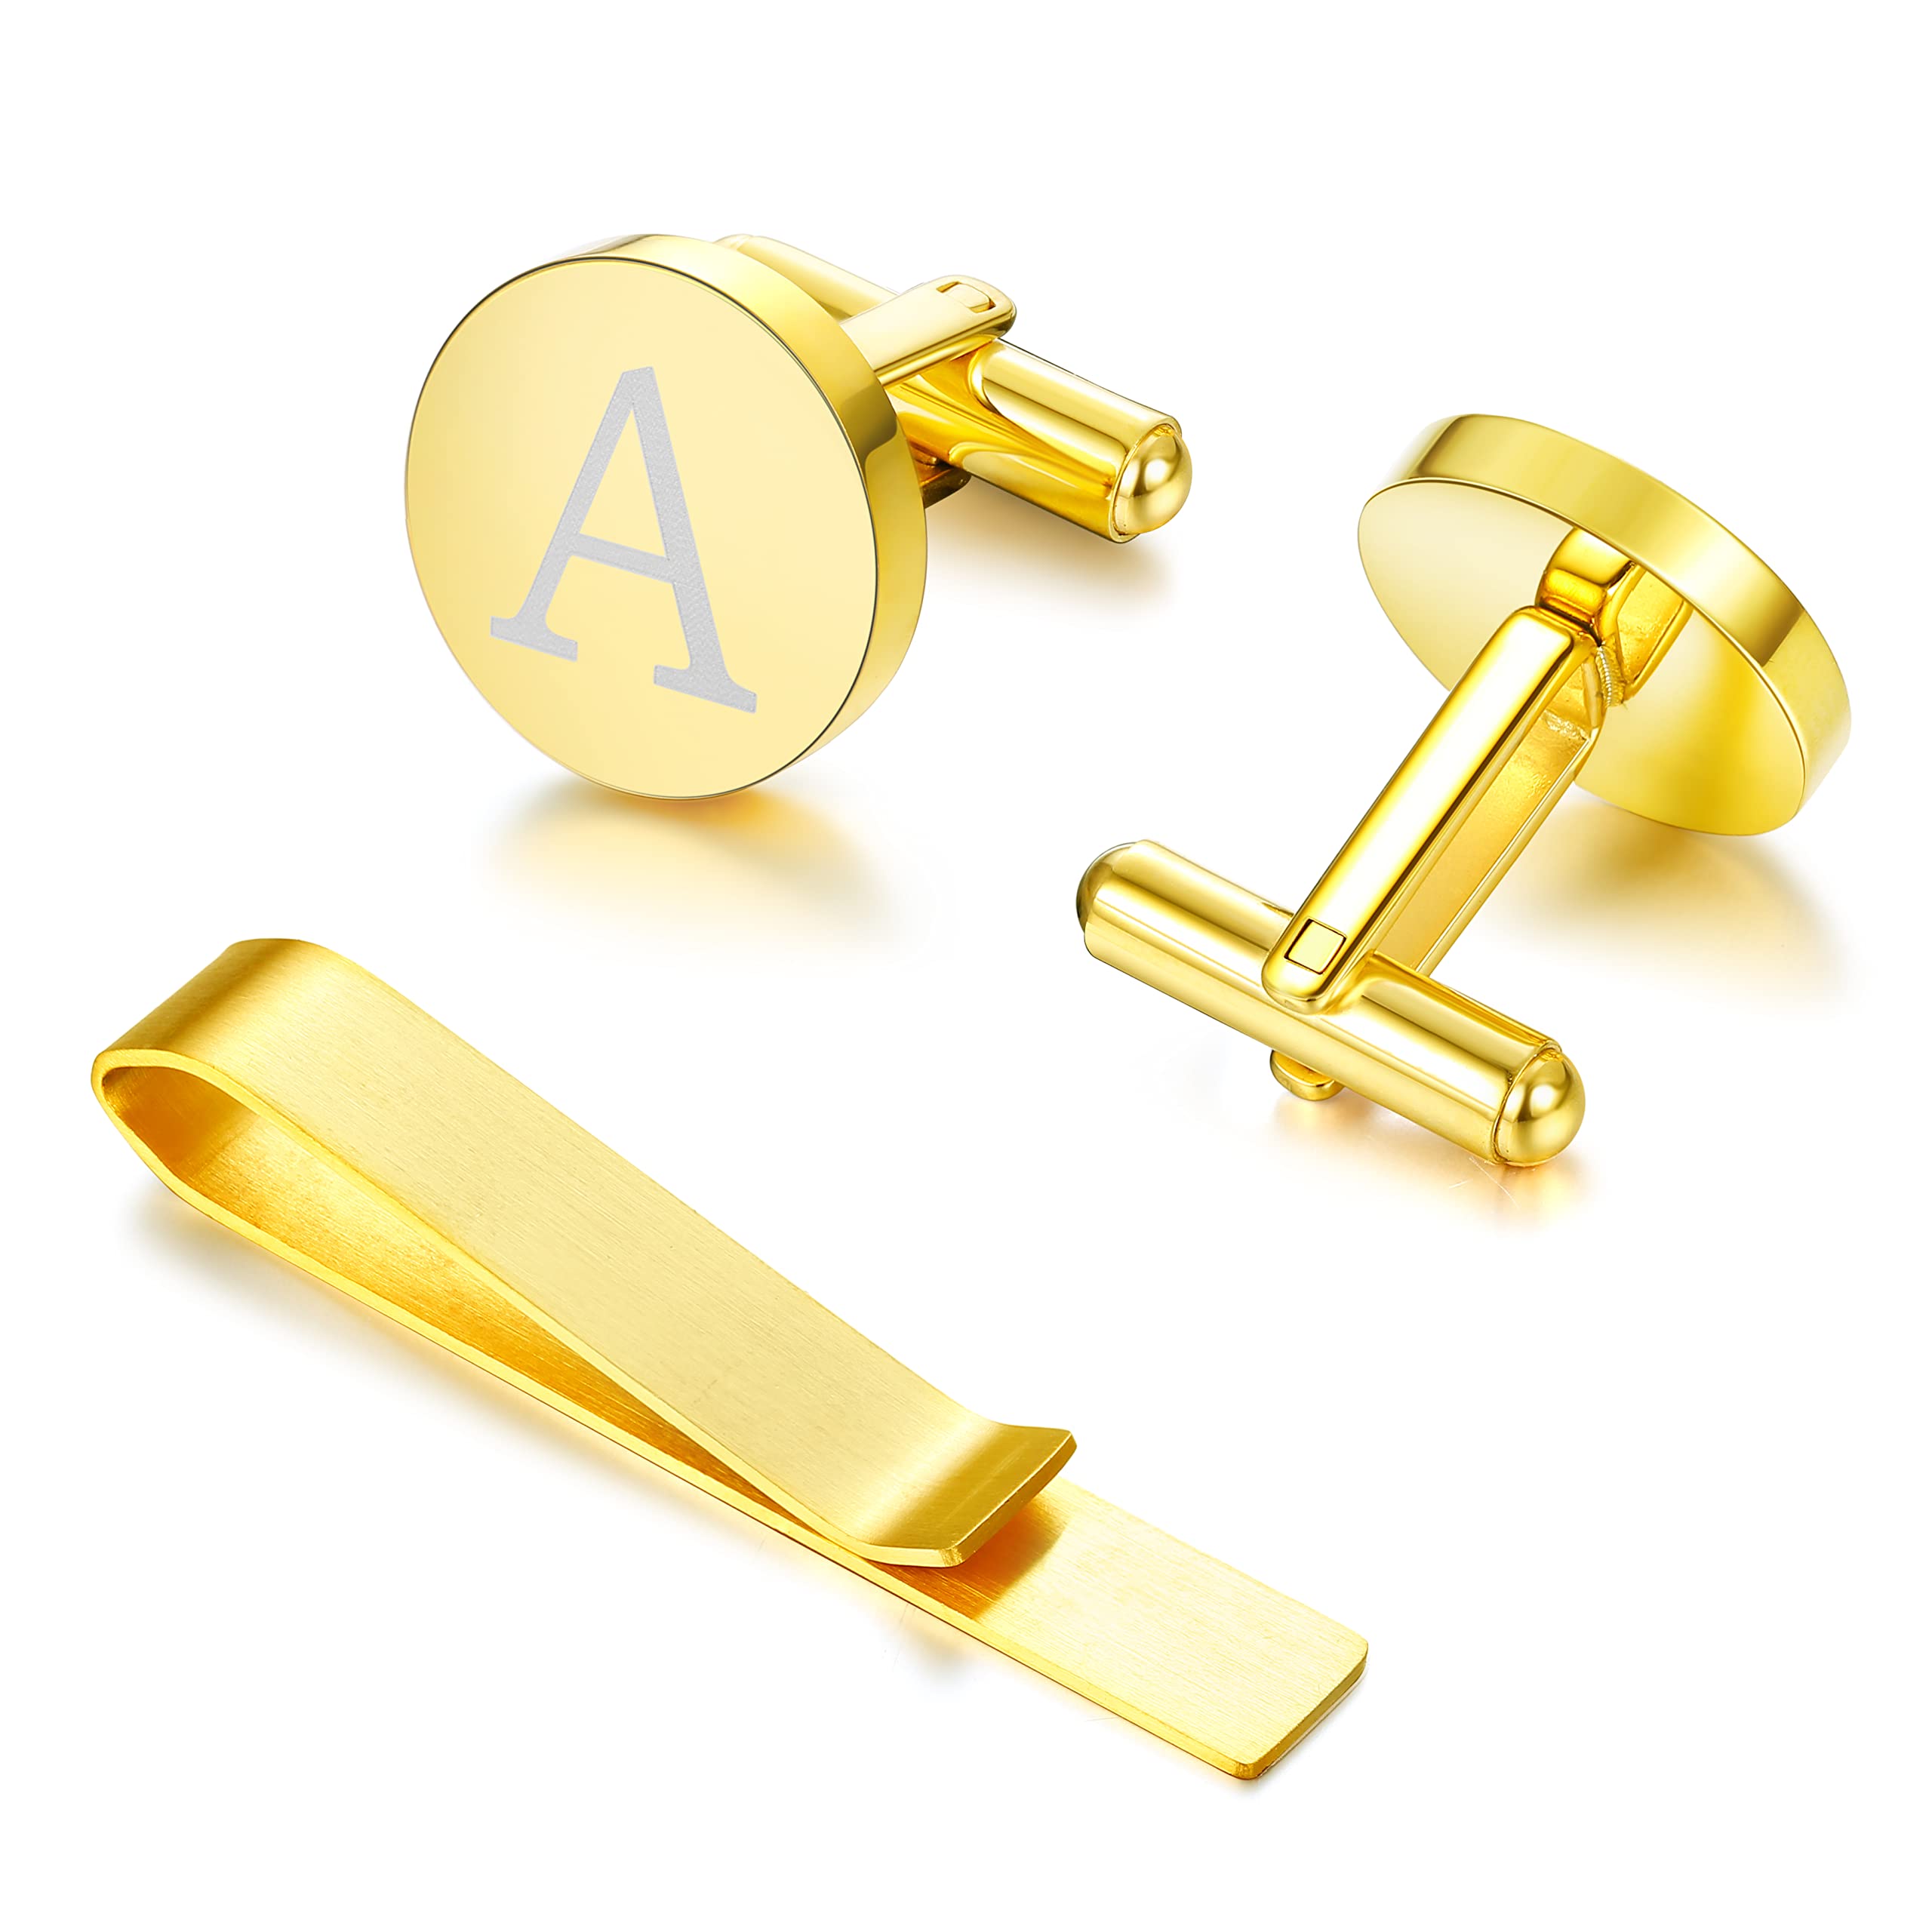 Diamday Initial Cufflinks and Tie Clip Set for Men Personalized Gold Stainless Steel Cuff links and Tie Bar Letter Alphabet A Gift with Box for Wedding, Groomsmen, Husband,Father